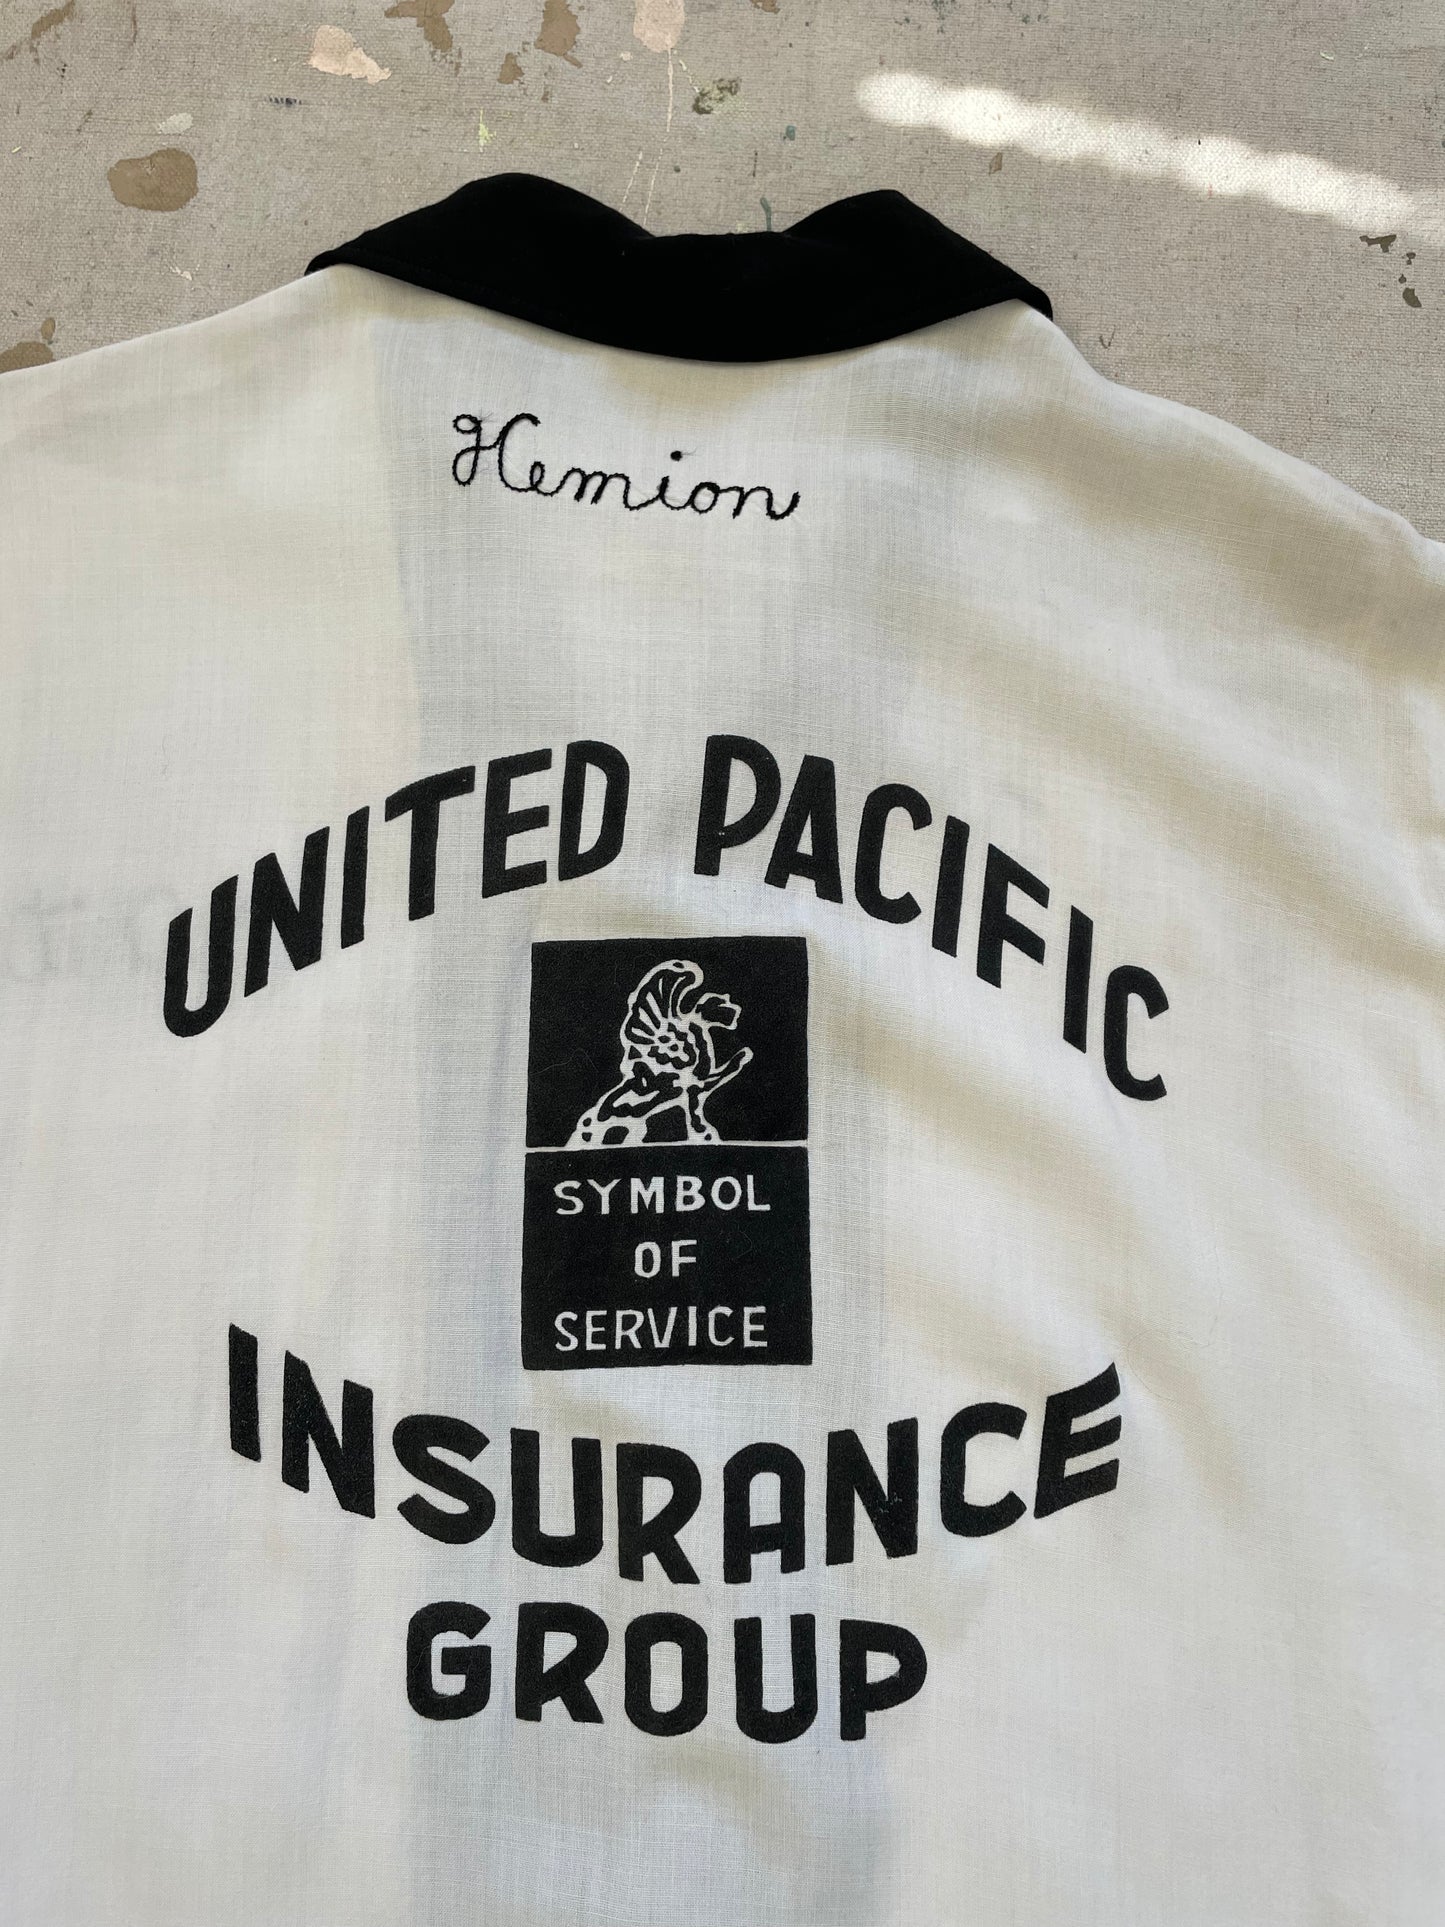 United Pacific Life Insurance Group Bowling Shirt